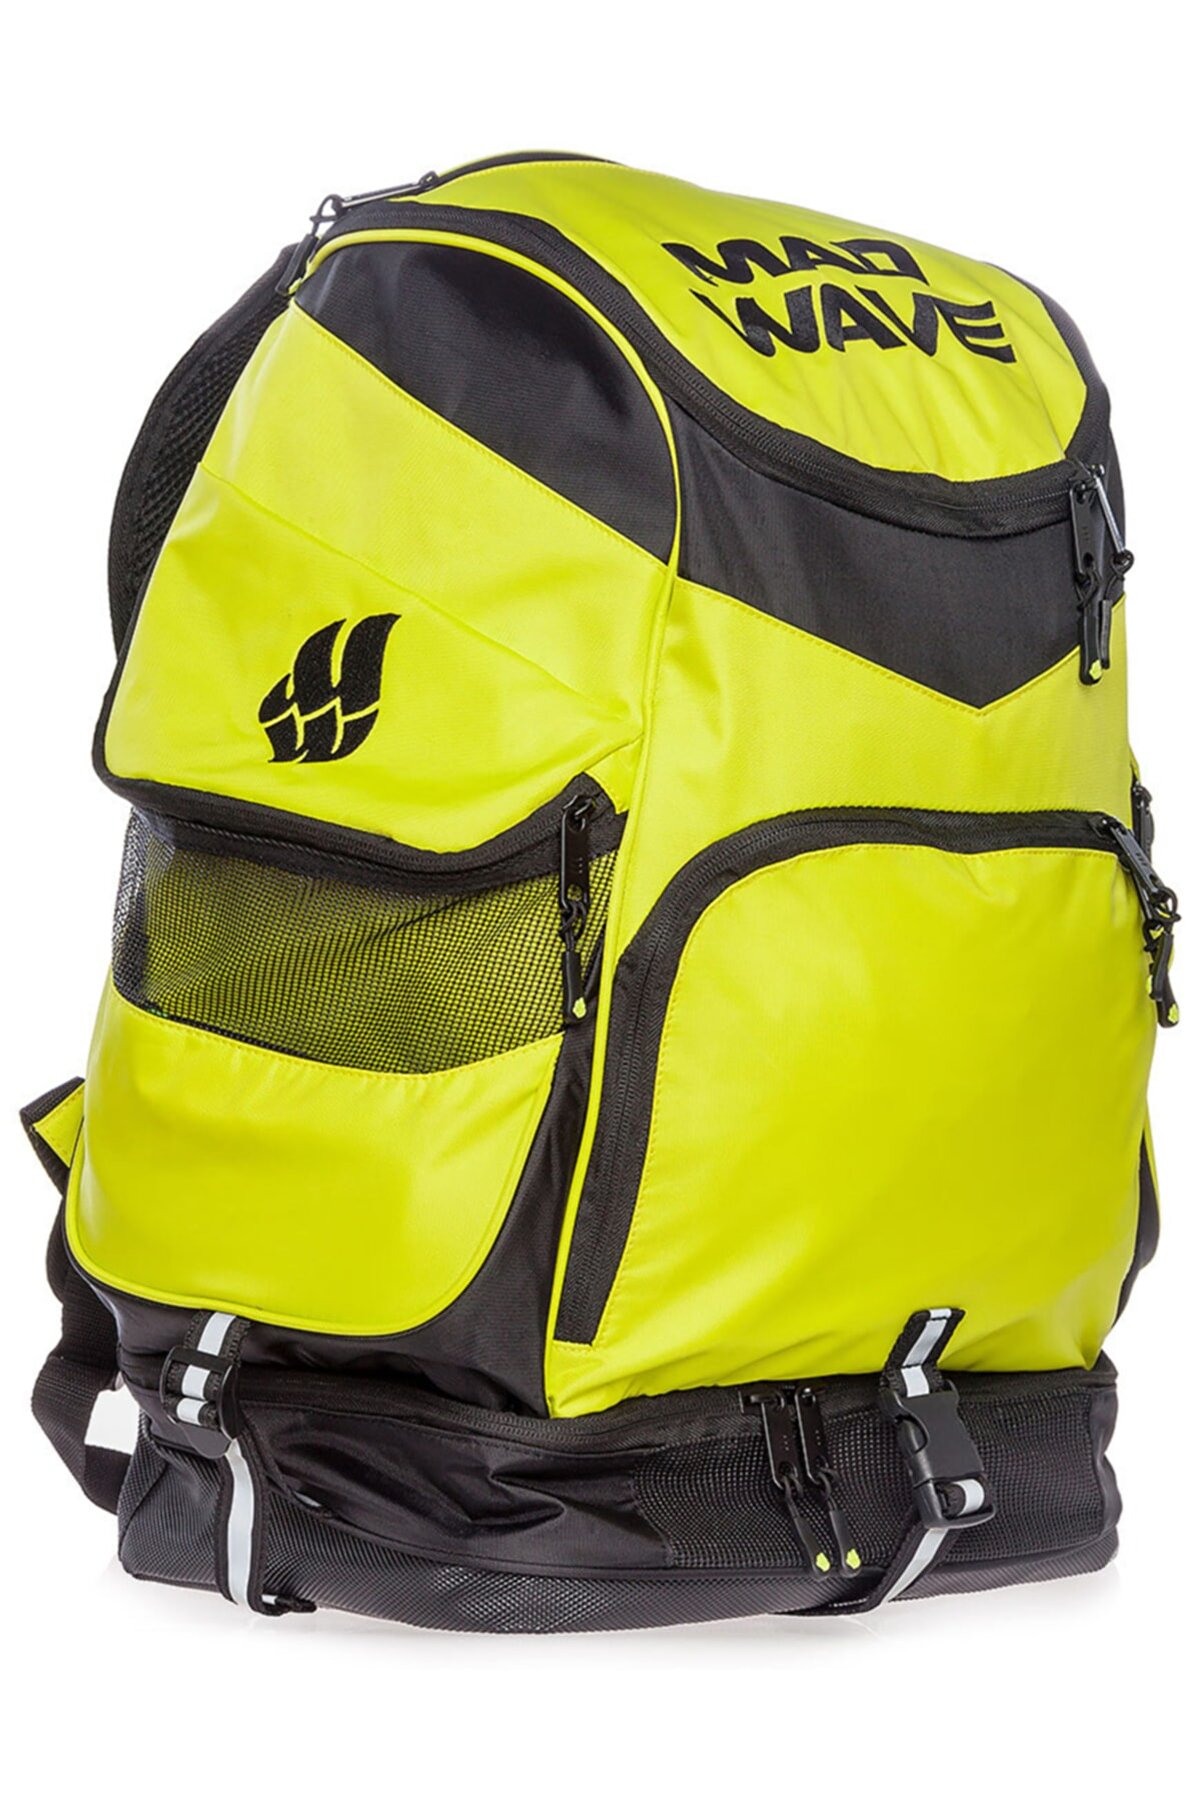 Mad Wave M1123 01 0 10w Backpack Backpack Mad Team, 52?32?2